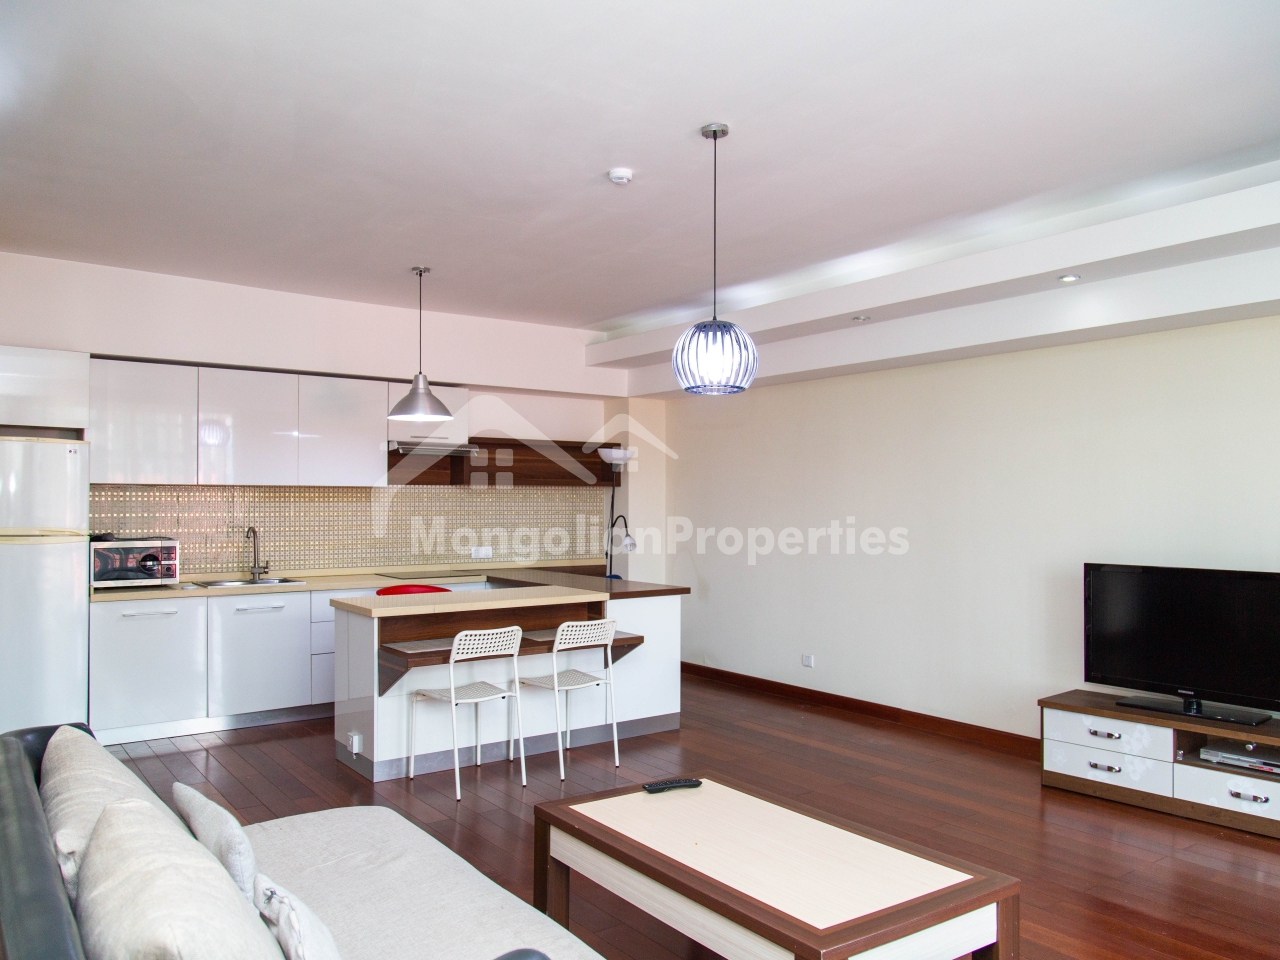 For sale: Clean 1 bedroom apartment is for sale near Shnagrila Mall and Shine Mongol school